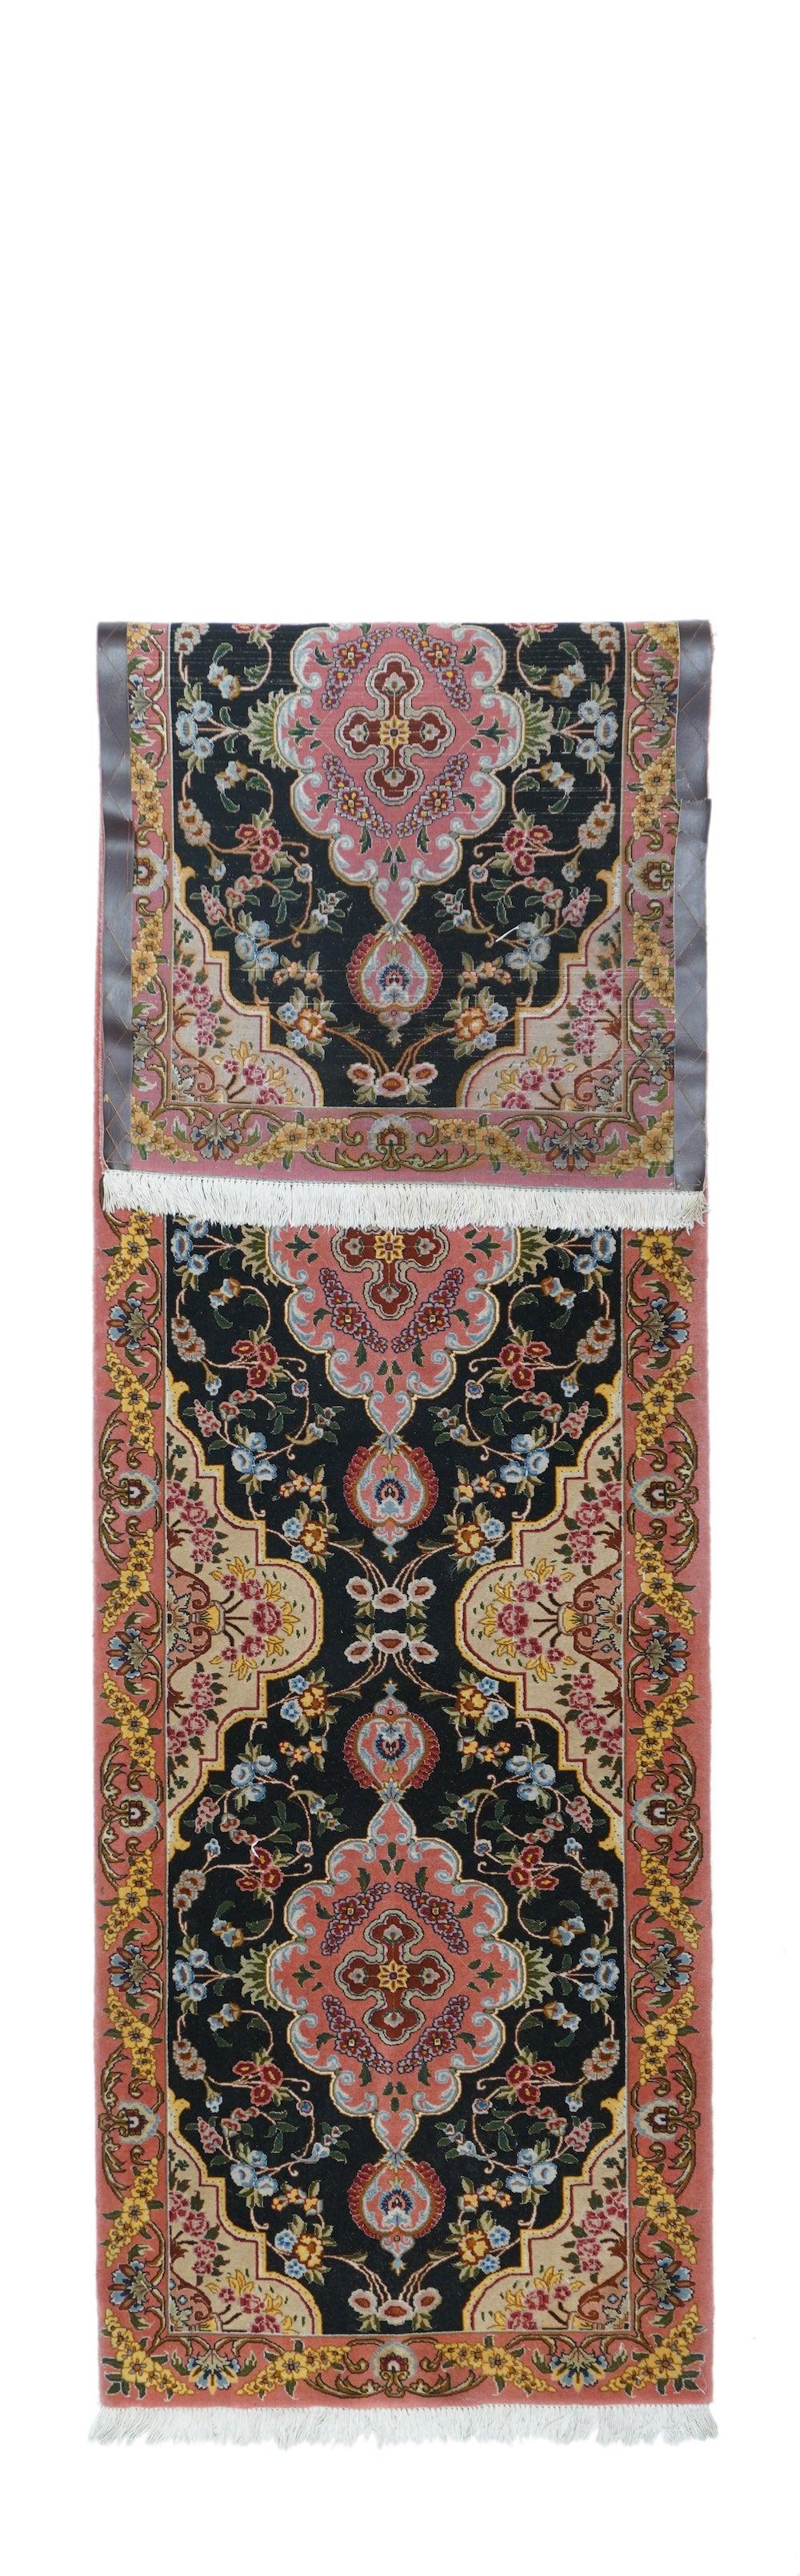 A Tabriz rug/carpet is a type in the general category of Persian carpets from the city of Tabriz, the capital city of East Azarbaijan Province in north west of Iran totally populated by Azerbaijanis. It is one of the oldest rug weaving centers and